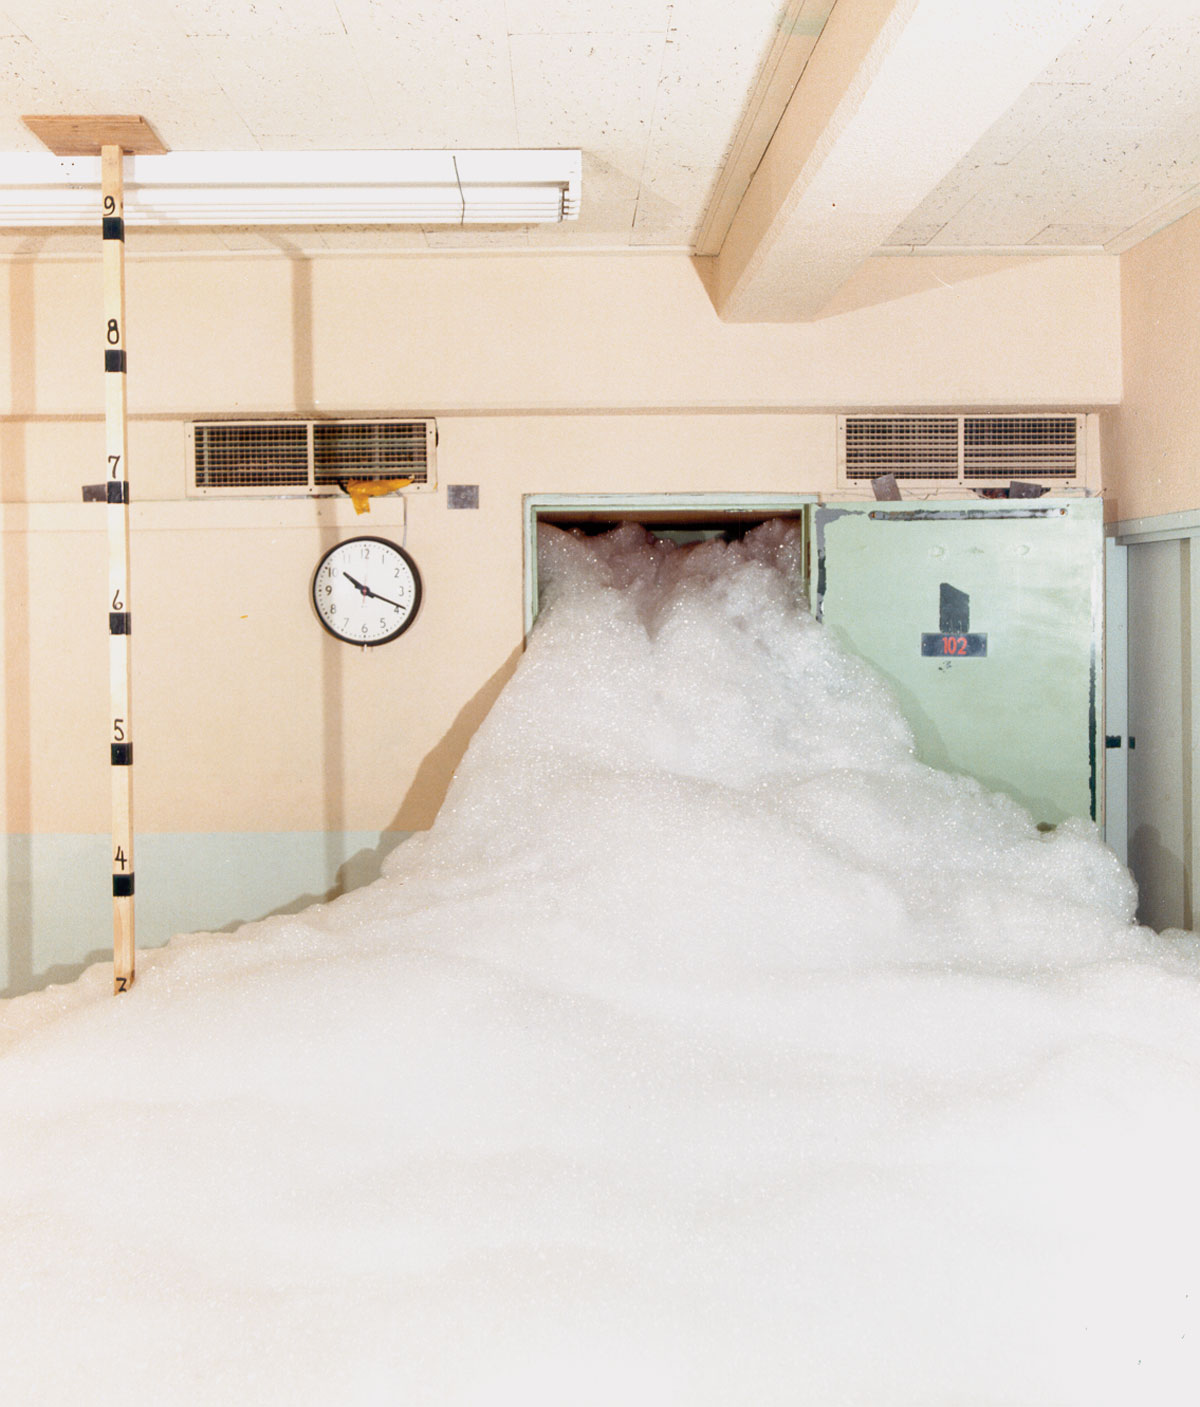 Foam being introduced into a room at Sandia National Laboratories.